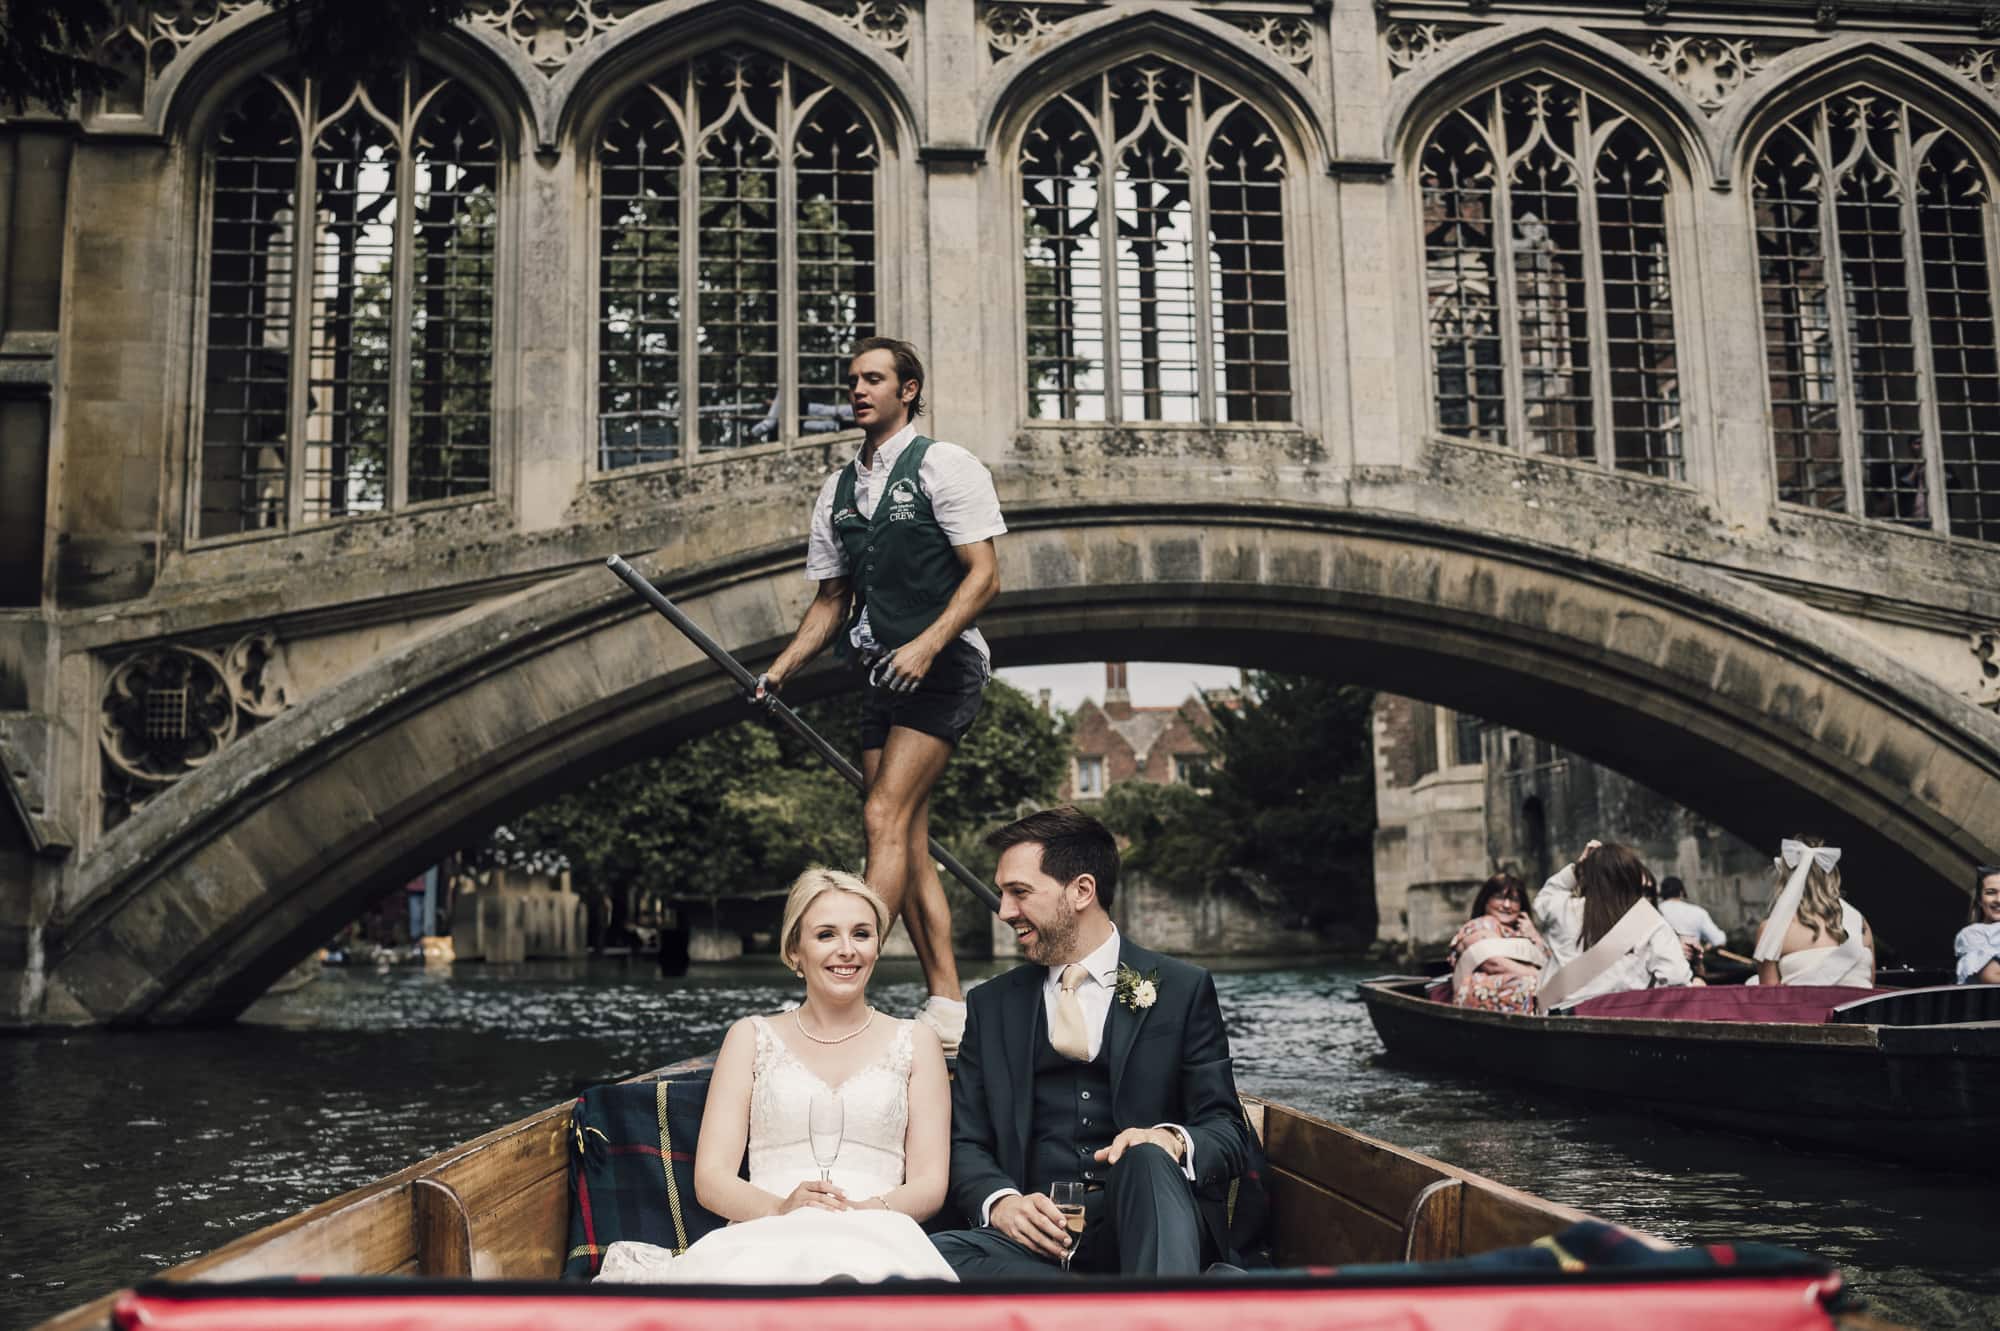 Summer Wedding in Cambridge - Punting on the river cam with the Bridge & Groom